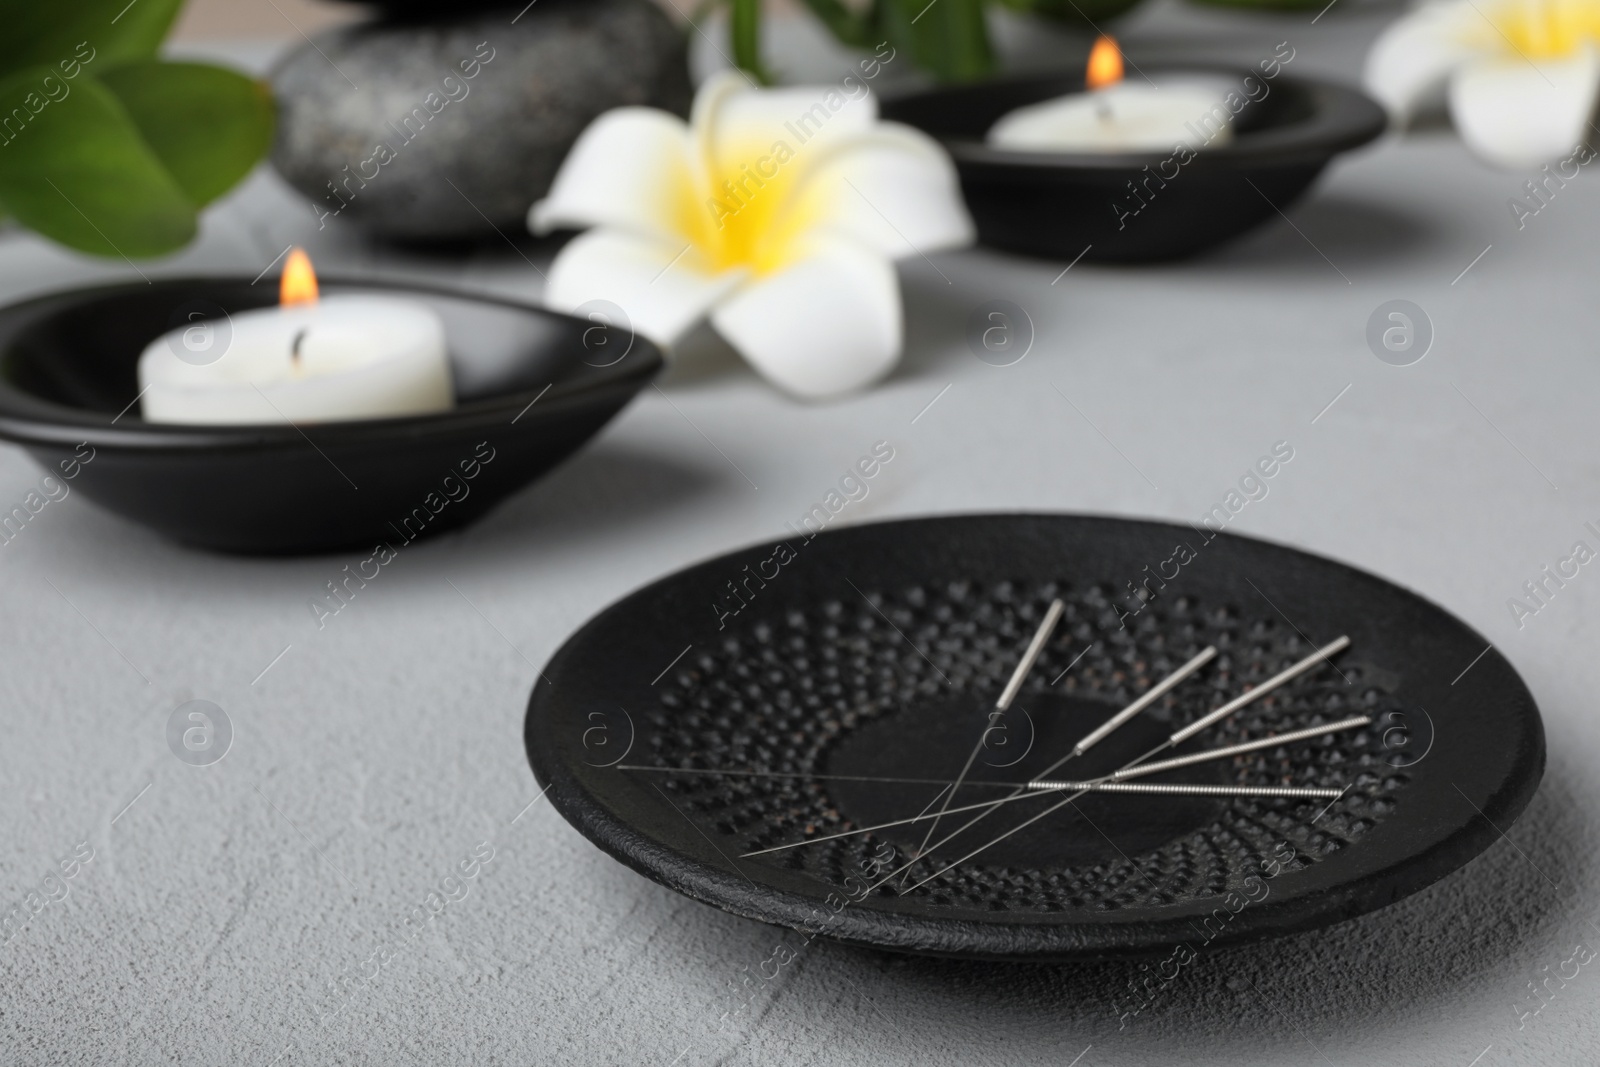 Photo of Plate with needles for acupuncture on table